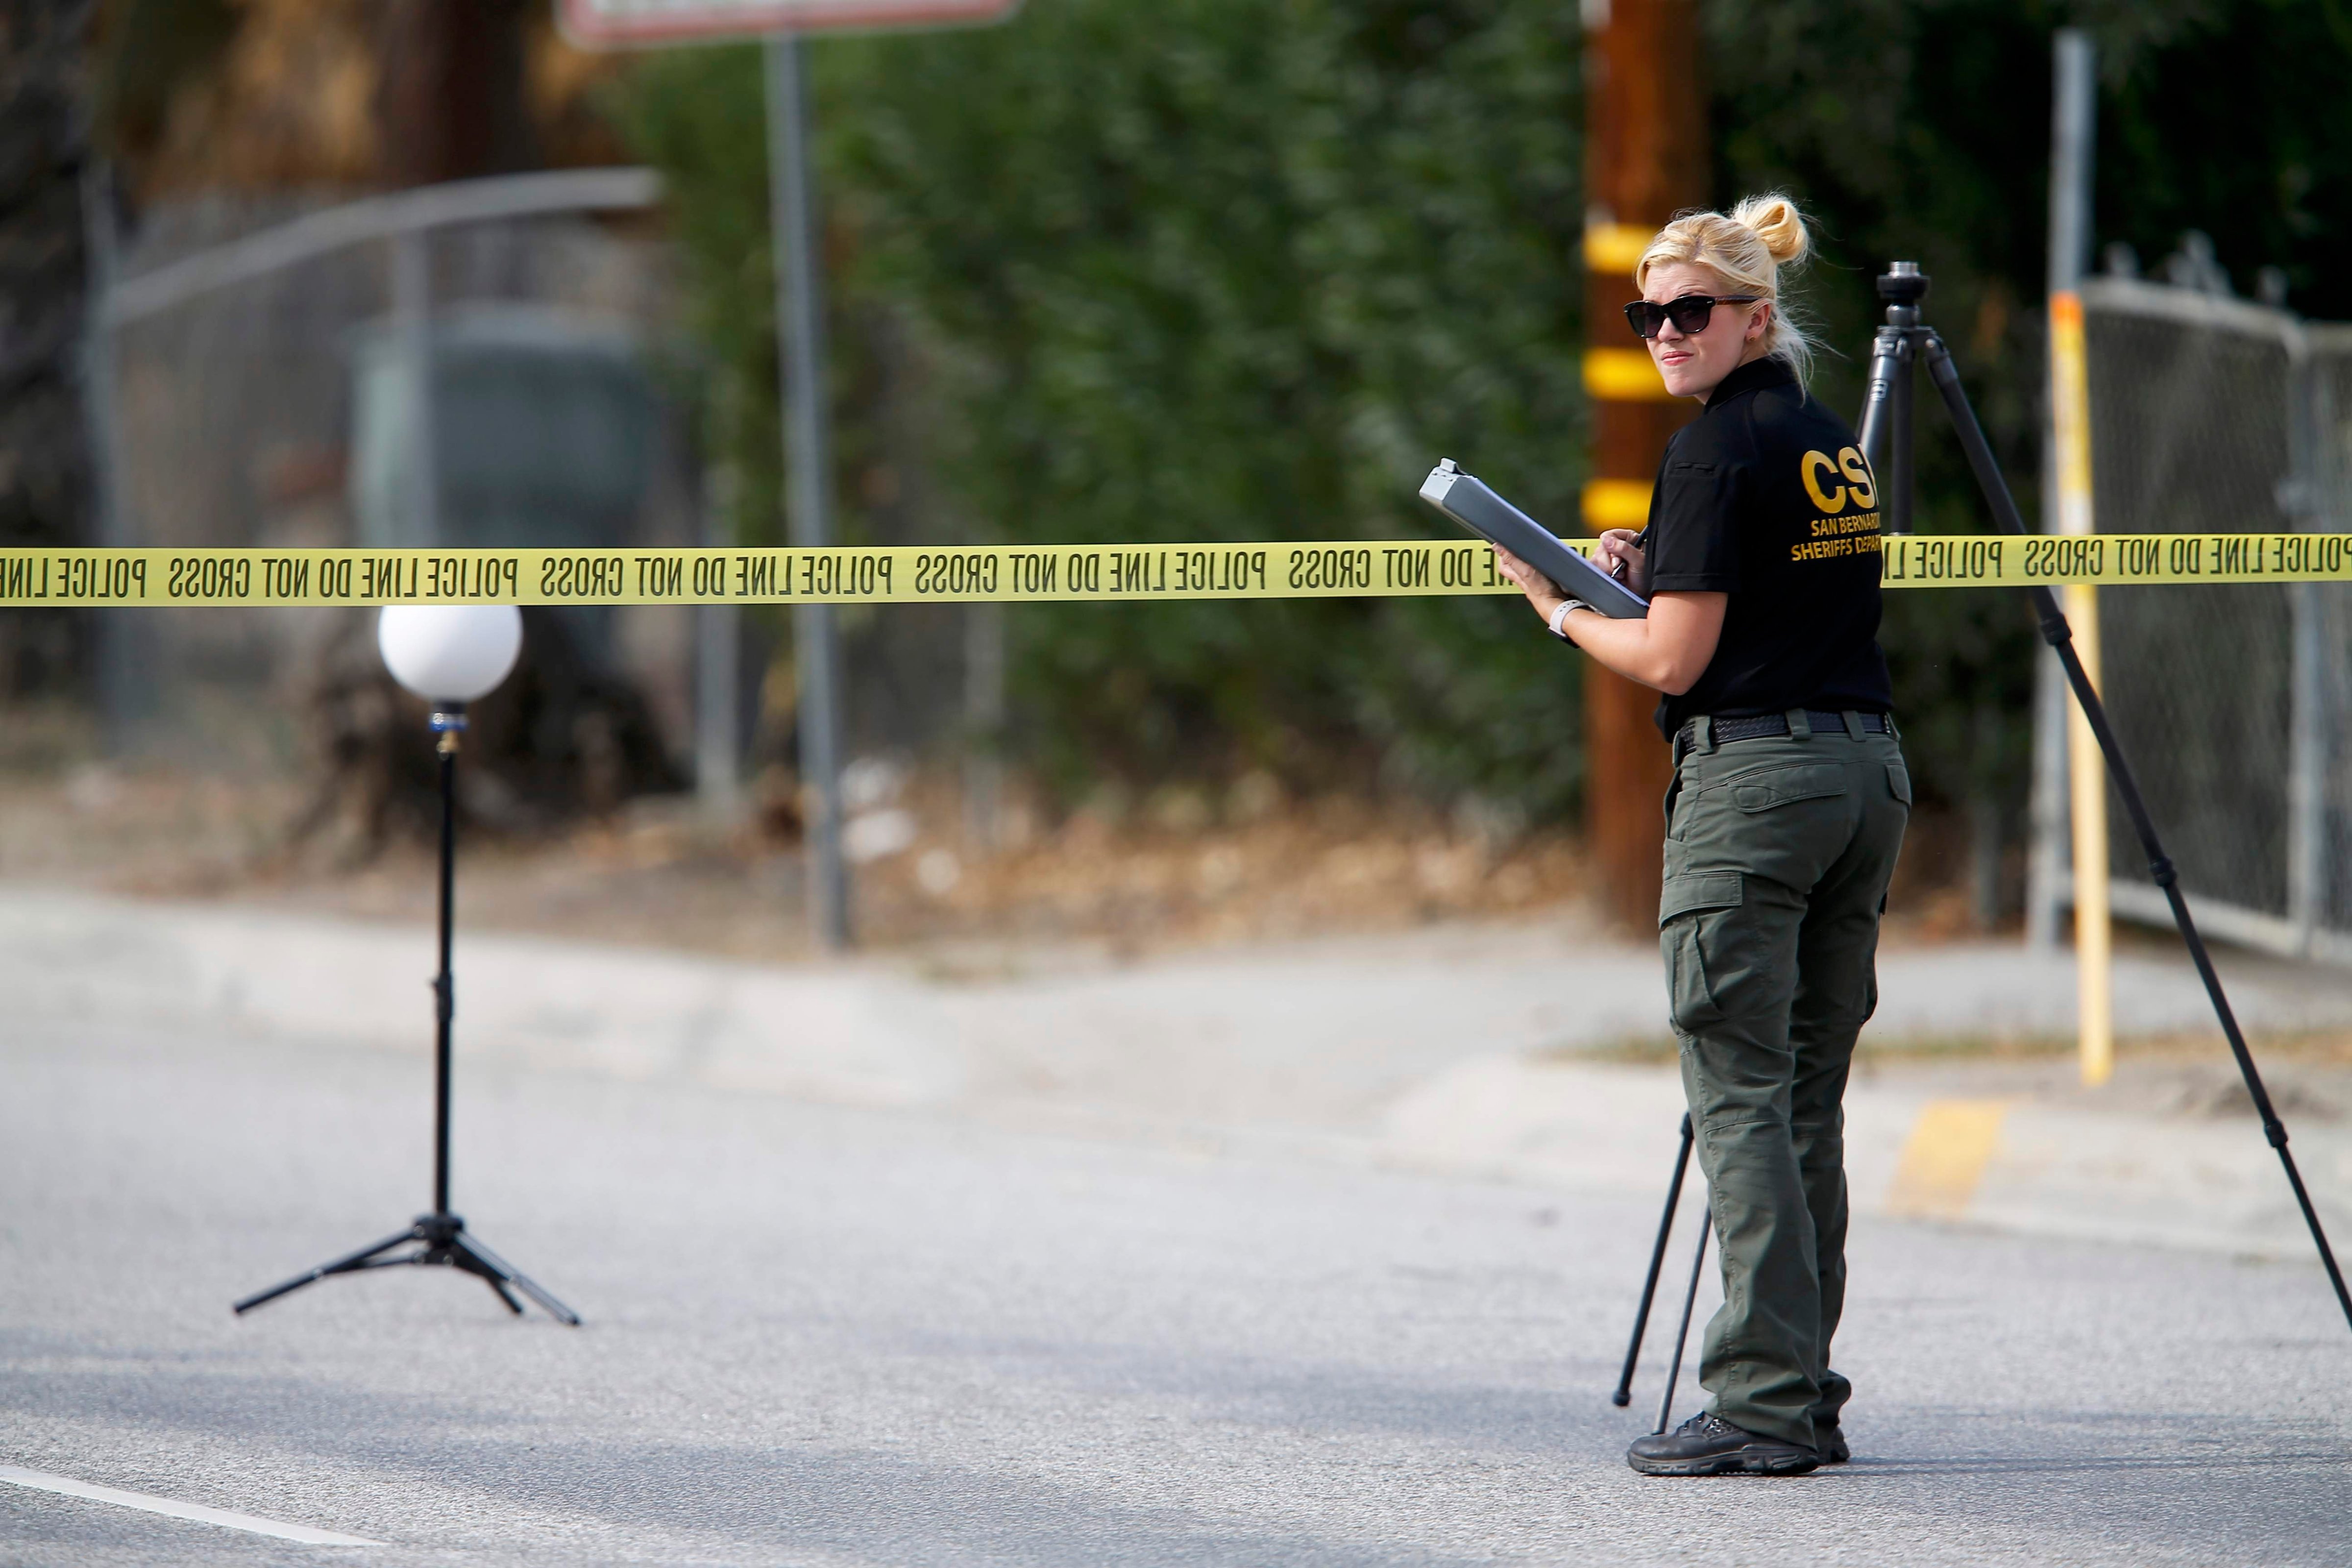 A Sheriff's Office Crime Scene Iinvestigator inspects the scene around an SUV where two suspects were shot by police following a mass shooting in San Bernardino, California December 3, 2015. (Mike Blake—Reuters)